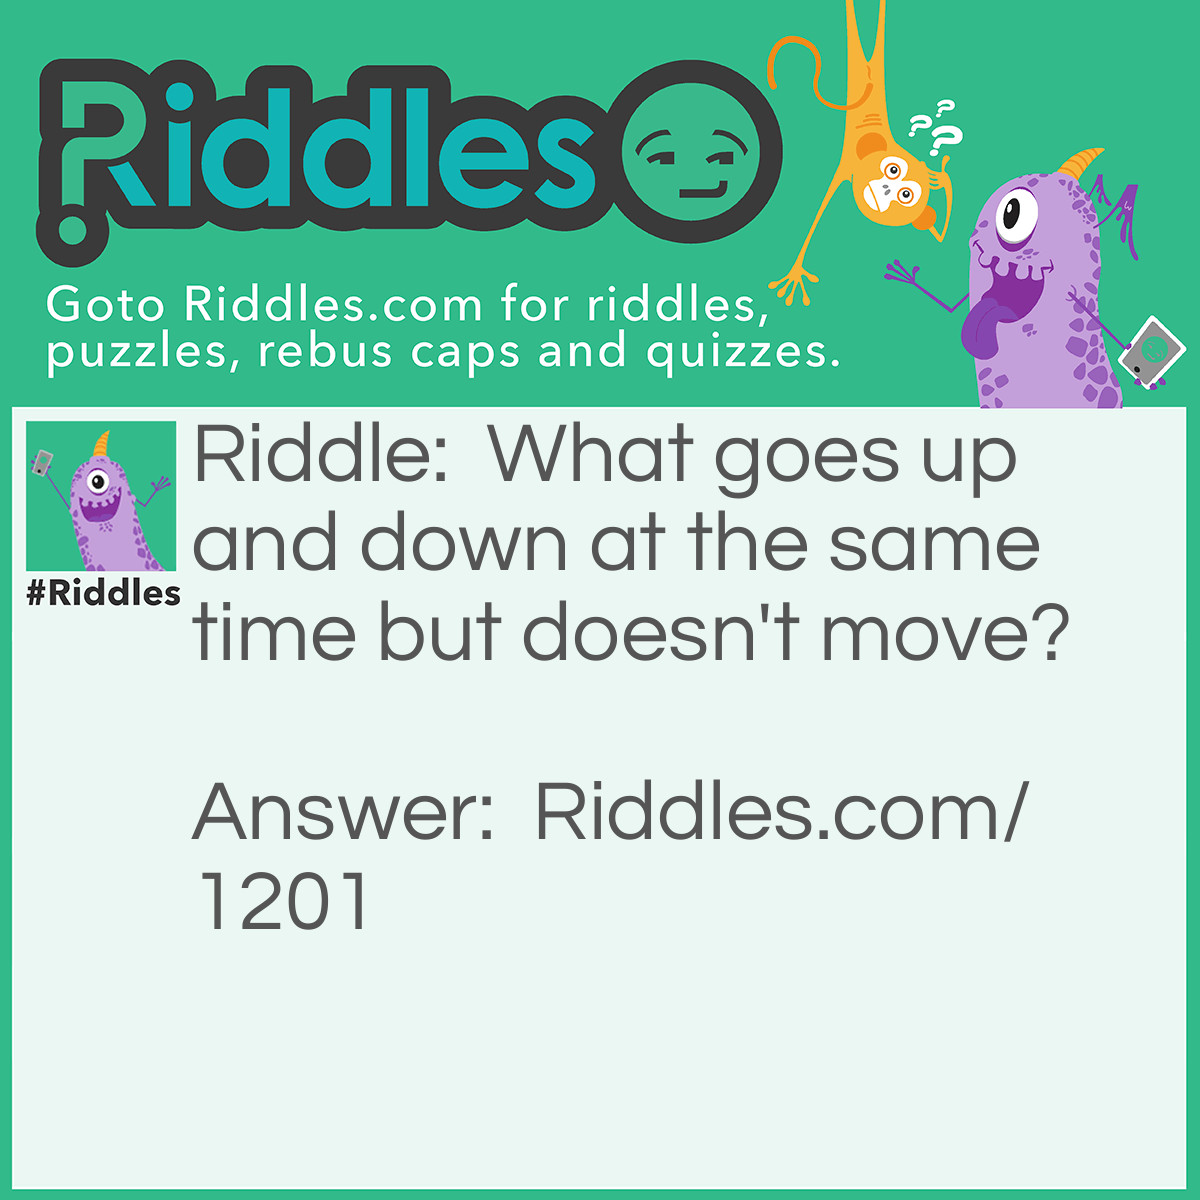 Riddle: What goes up and down at the same time but doesn't move? Answer: Stairs!